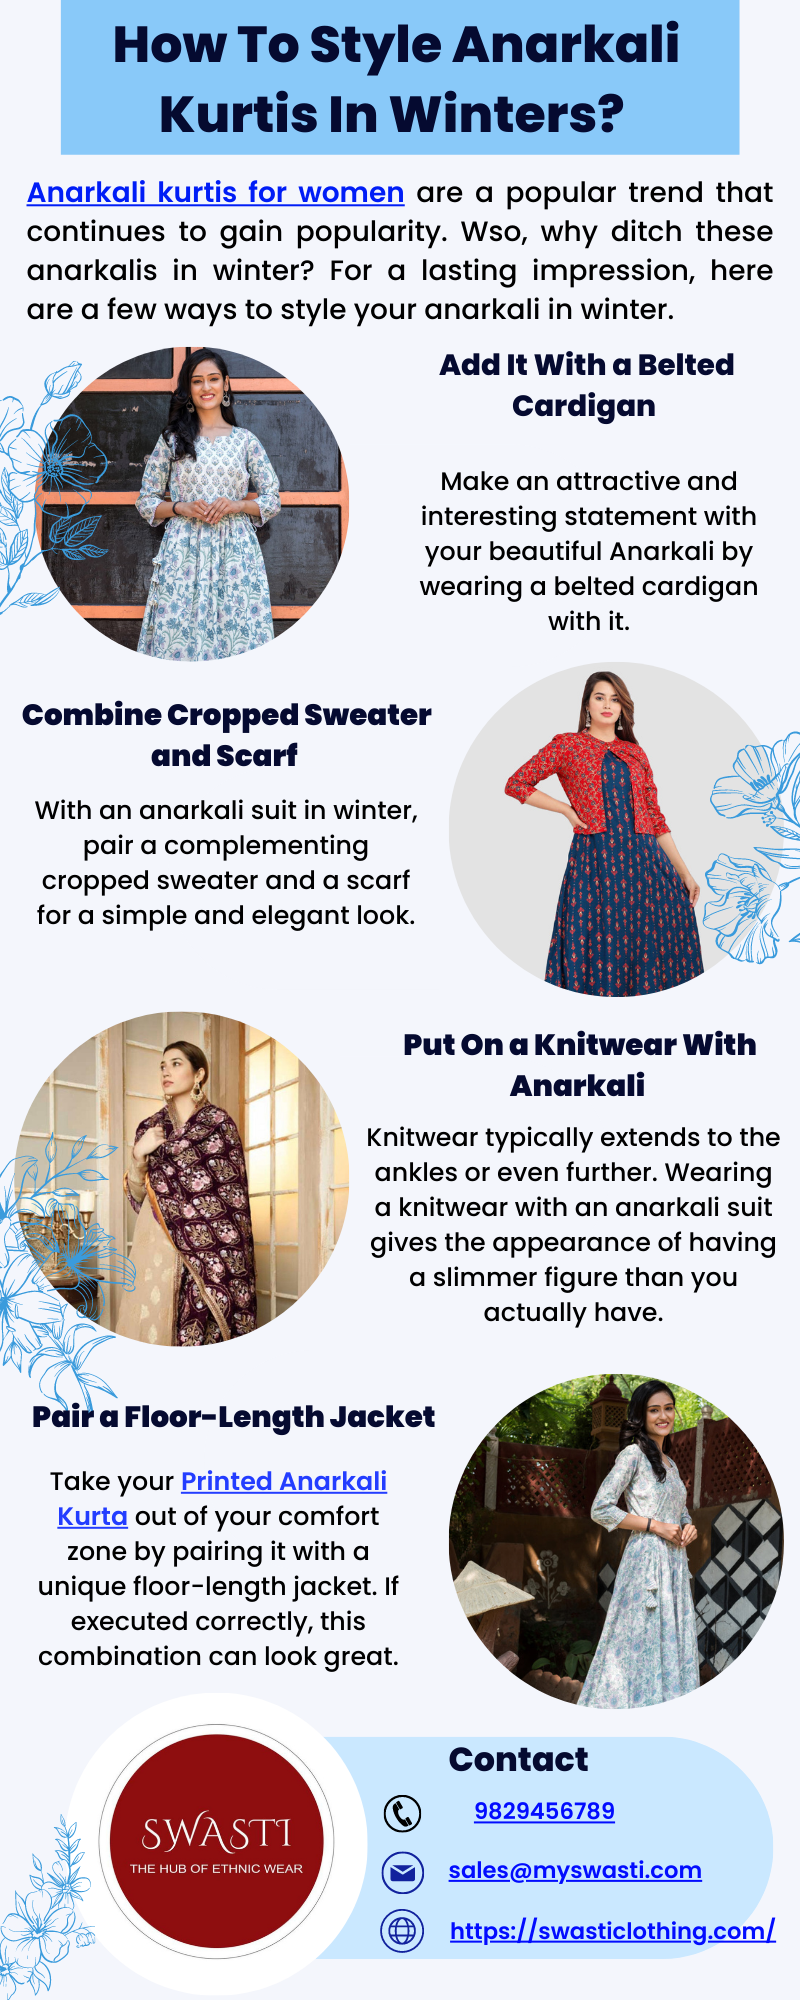 How To Style Anarkali Kurtis In Winters?